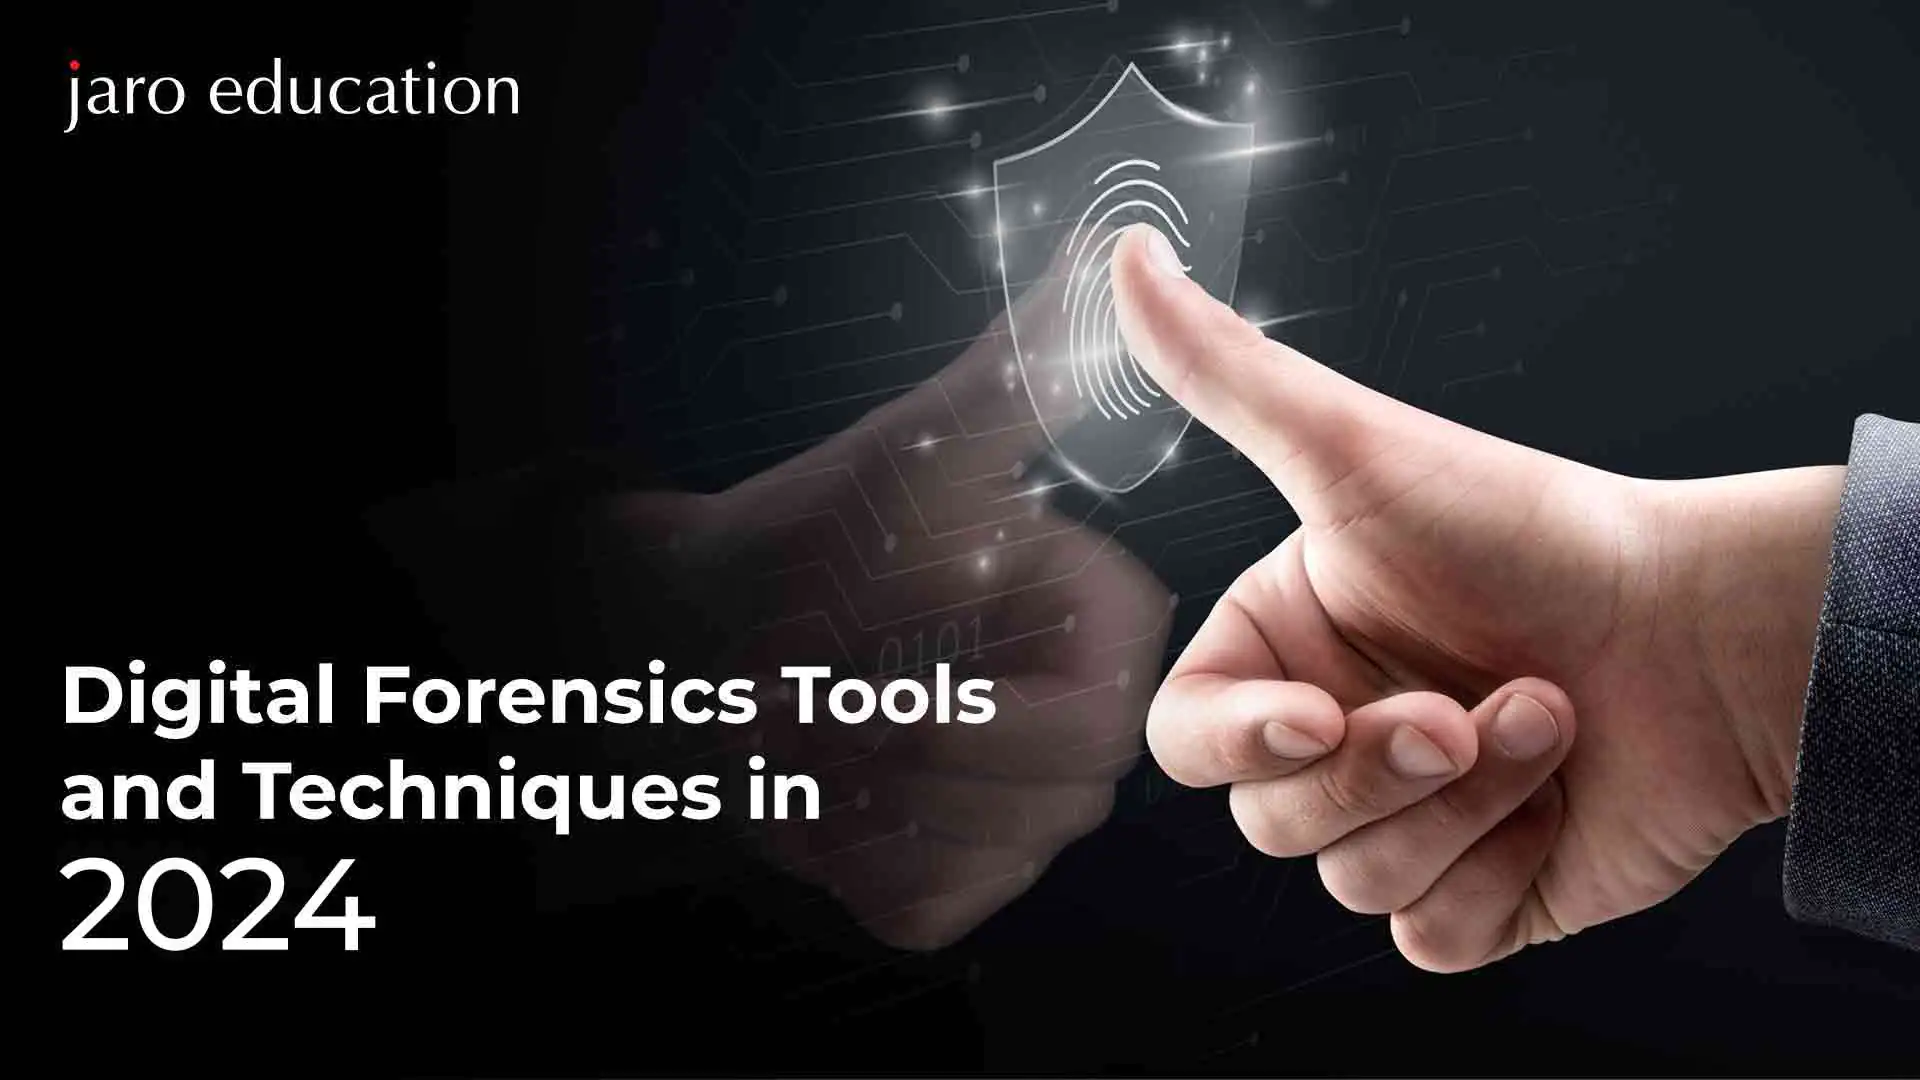 Digital Forensics Tools and Techniques in 2024